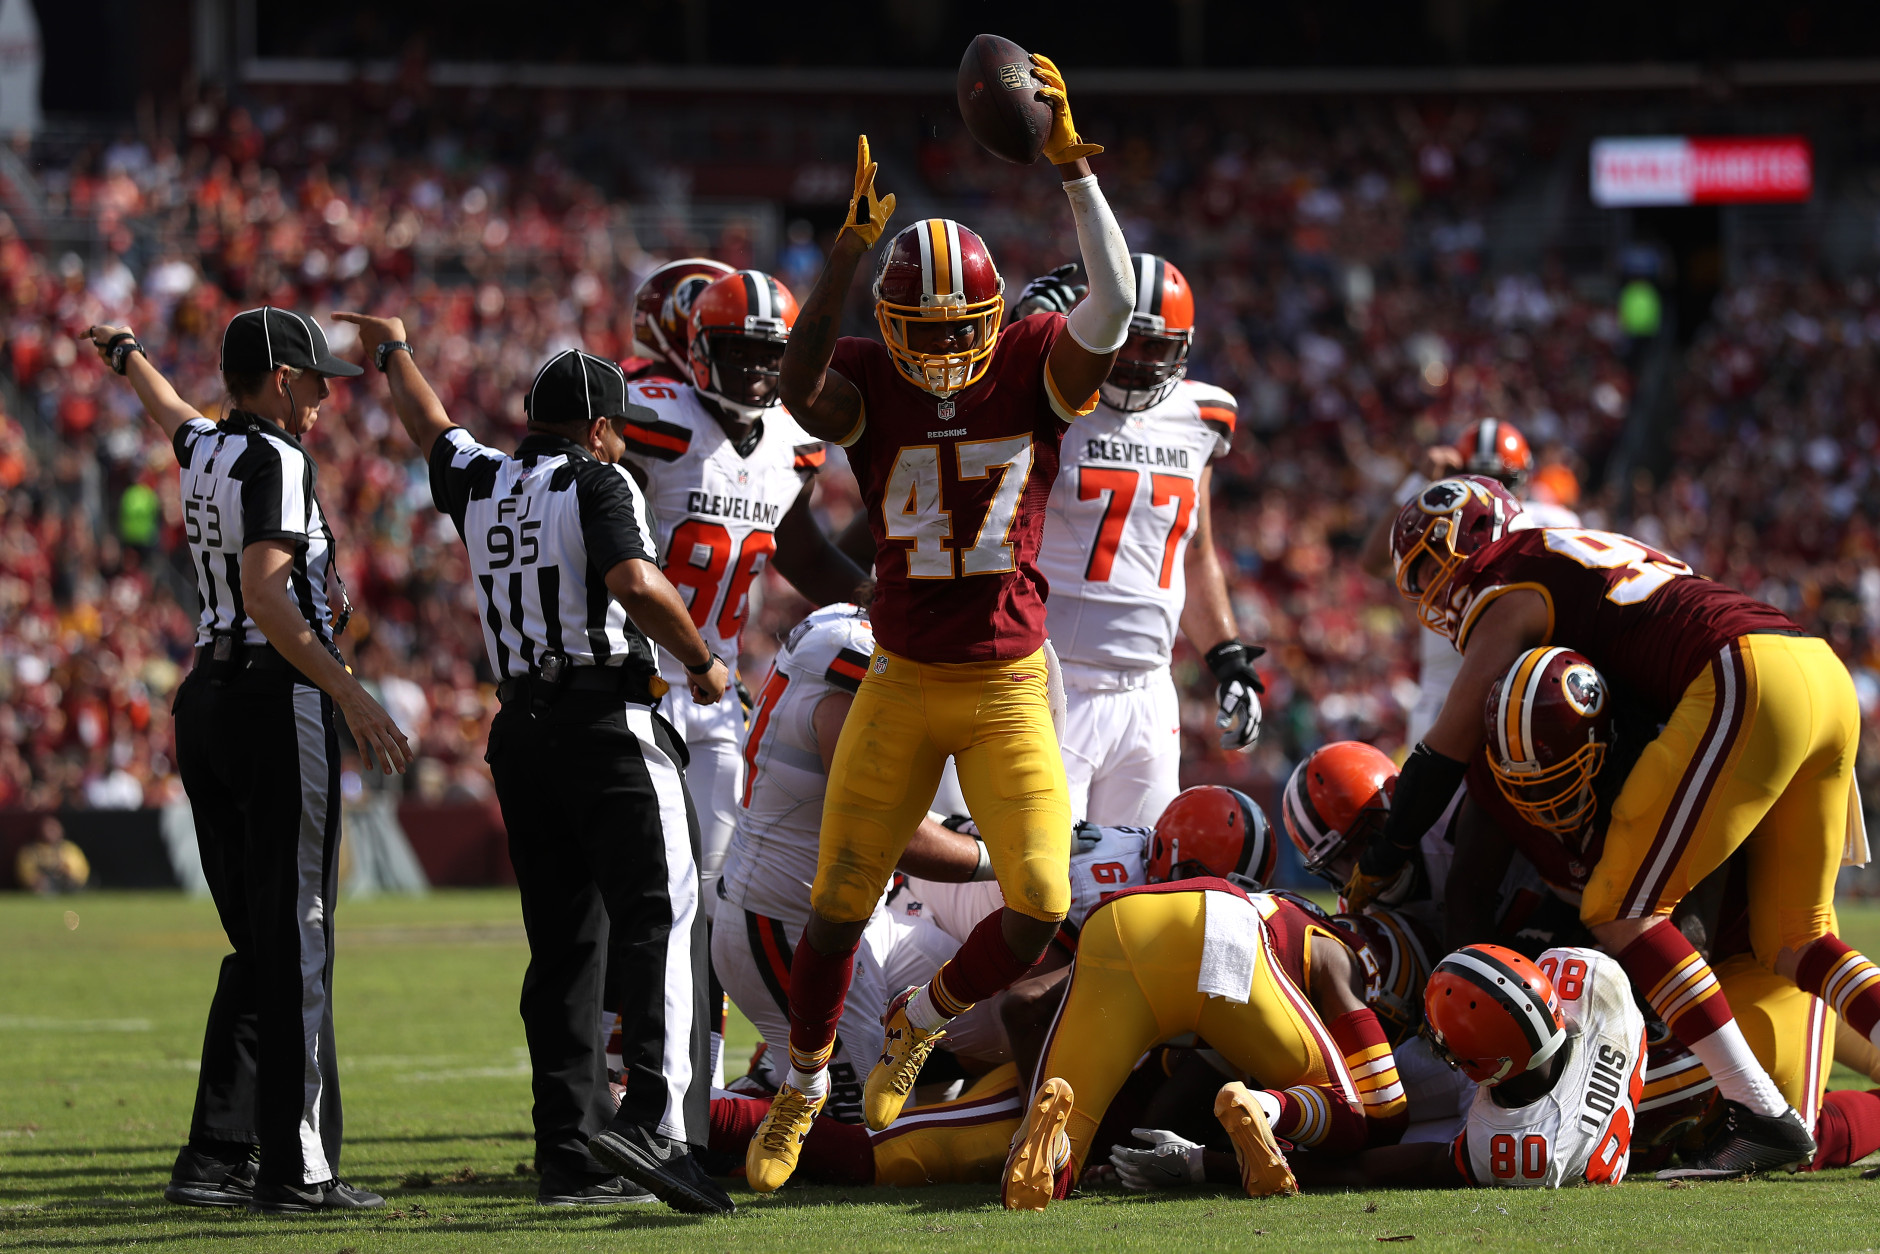 LANDOVER, MD - OCTOBER 2: Cornerback Quinton Dunbar #47 of the Washington Redskins celebrates after recovering a fumble against the Cleveland Browns in the third quarter at FedExField on October 2, 2016 in Landover, Maryland. (Photo by Patrick Smith/Getty Images)